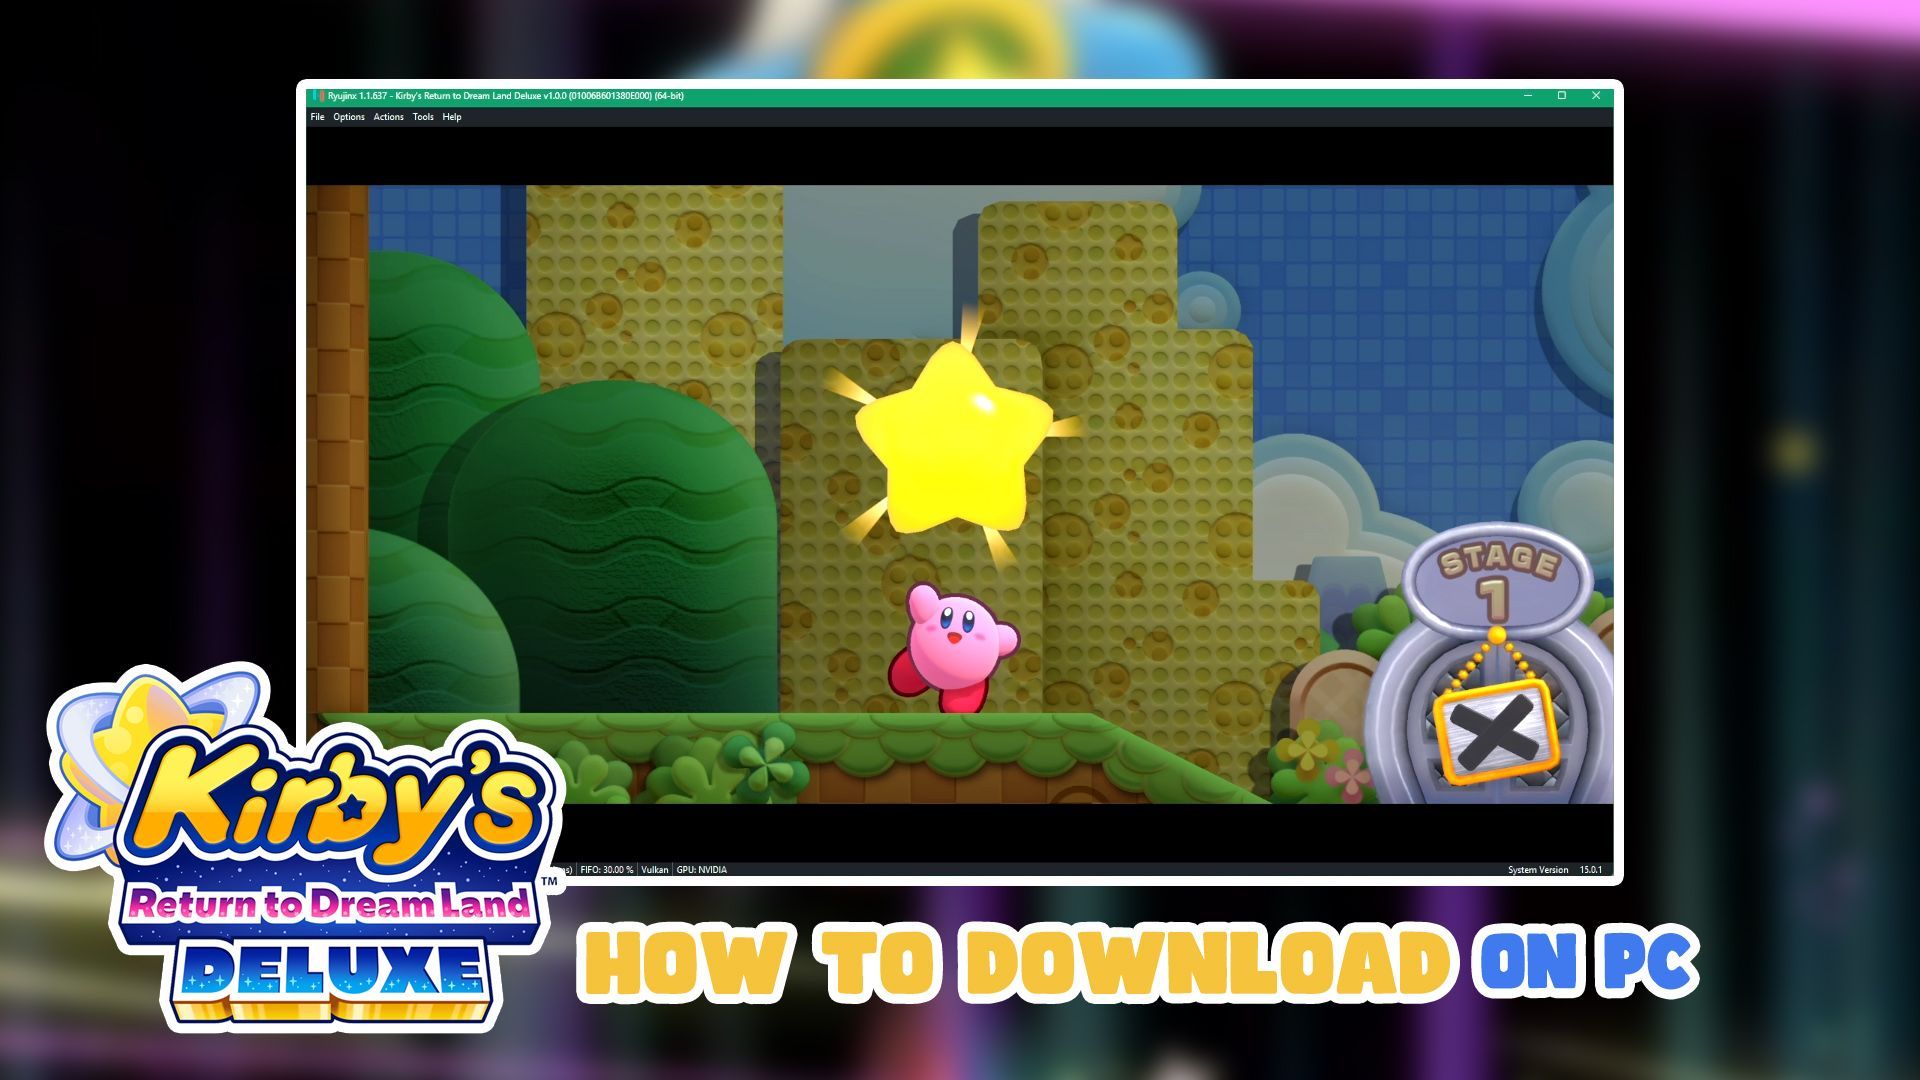 How to Download Ryujinx Emulator and Play Kirby's Return to Dream Land  Deluxe on PC (XCI) - Bilibili